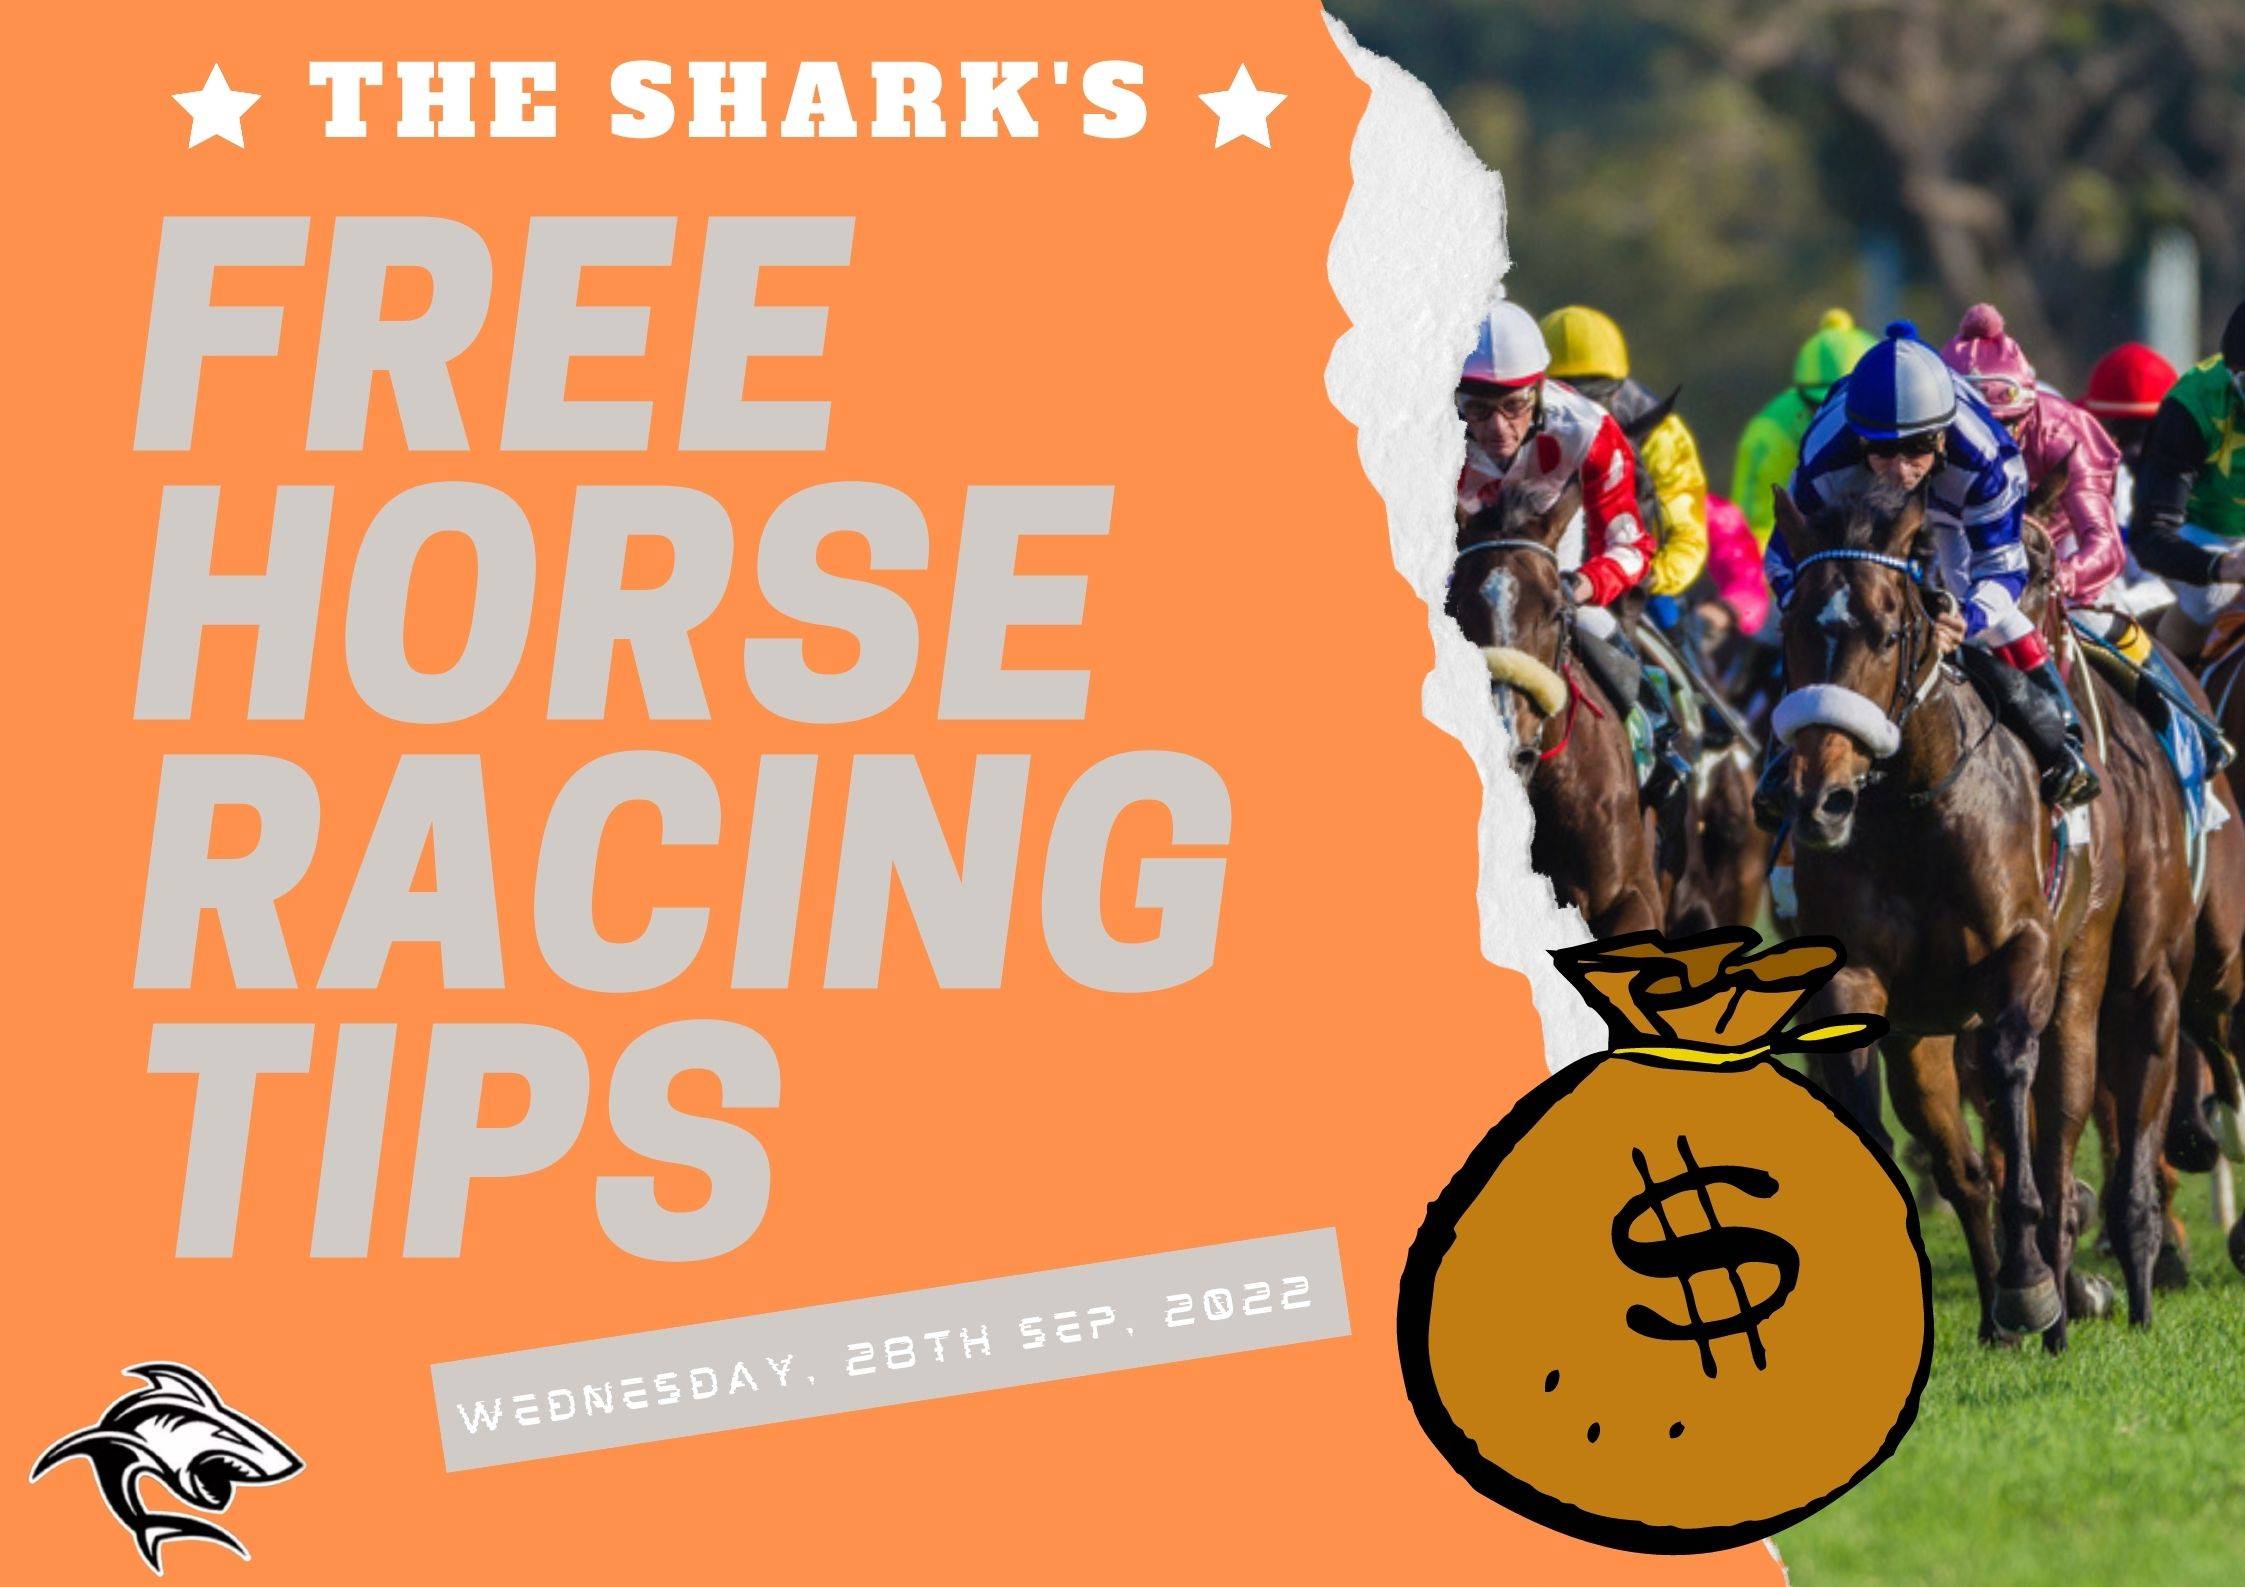 Free Horse Racing Tips - 28th Sep